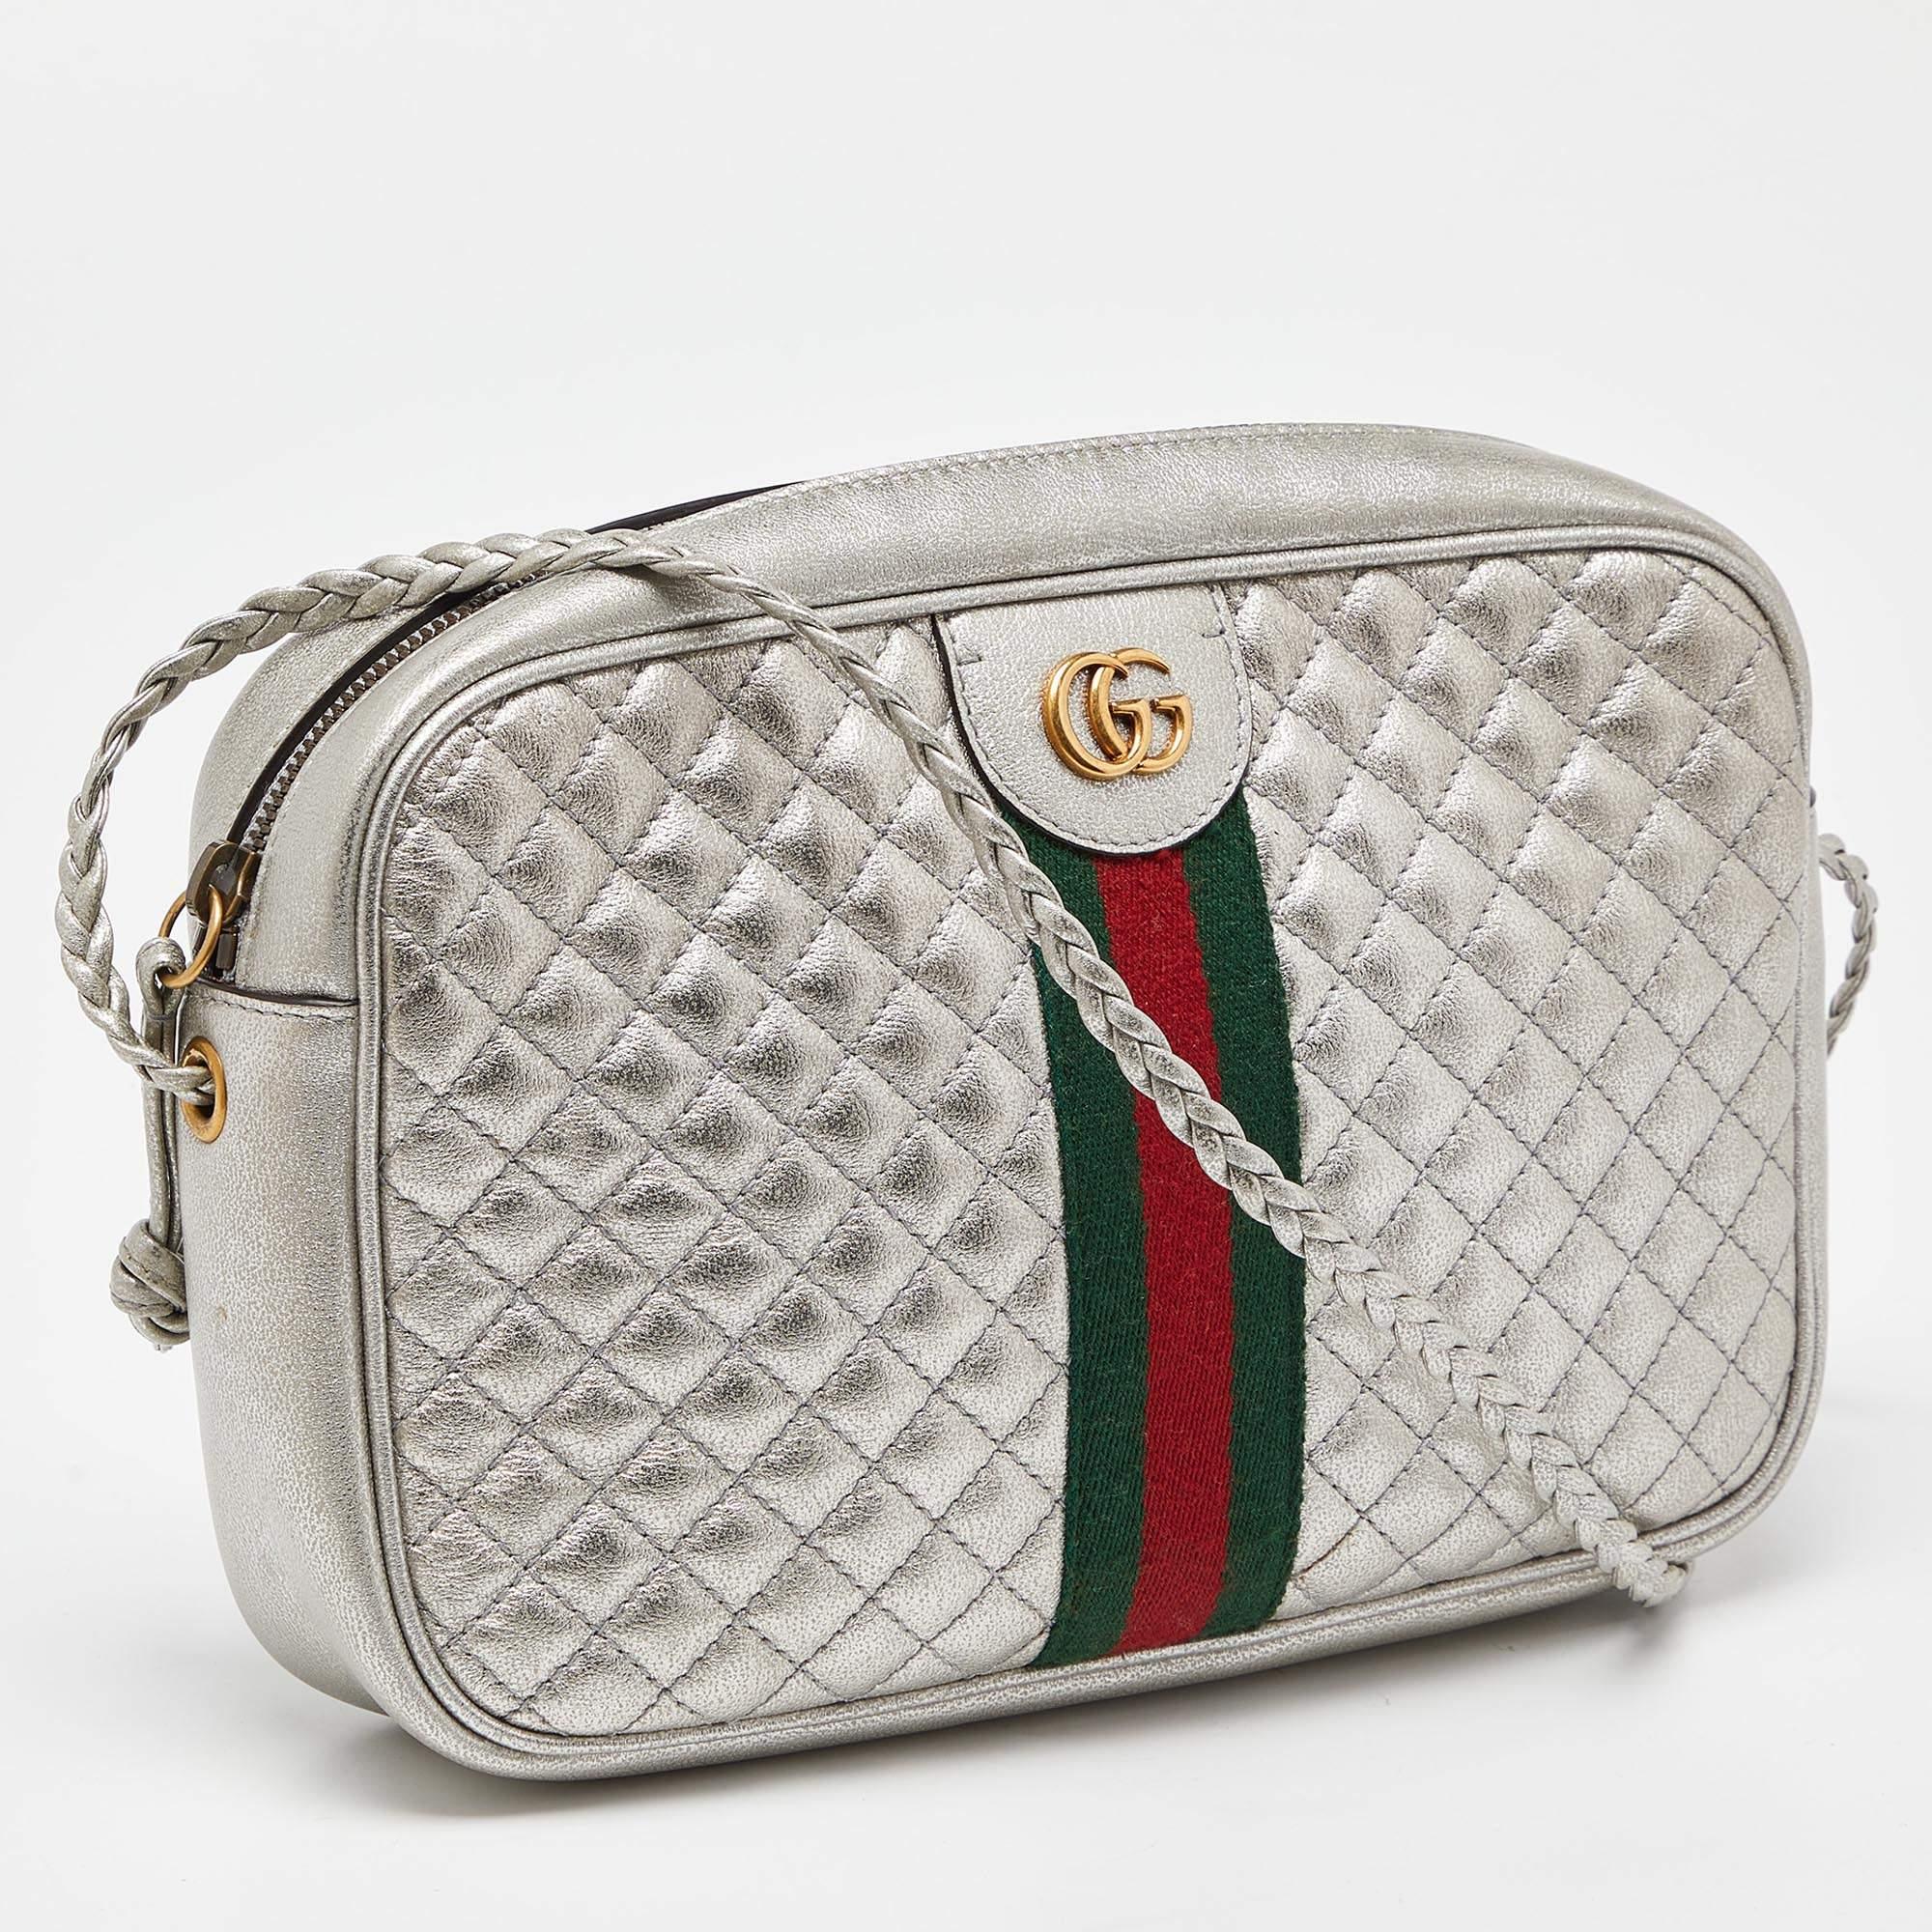 Gucci Silver Quilted Leather Small Trapuntata Shoulder Bag 5